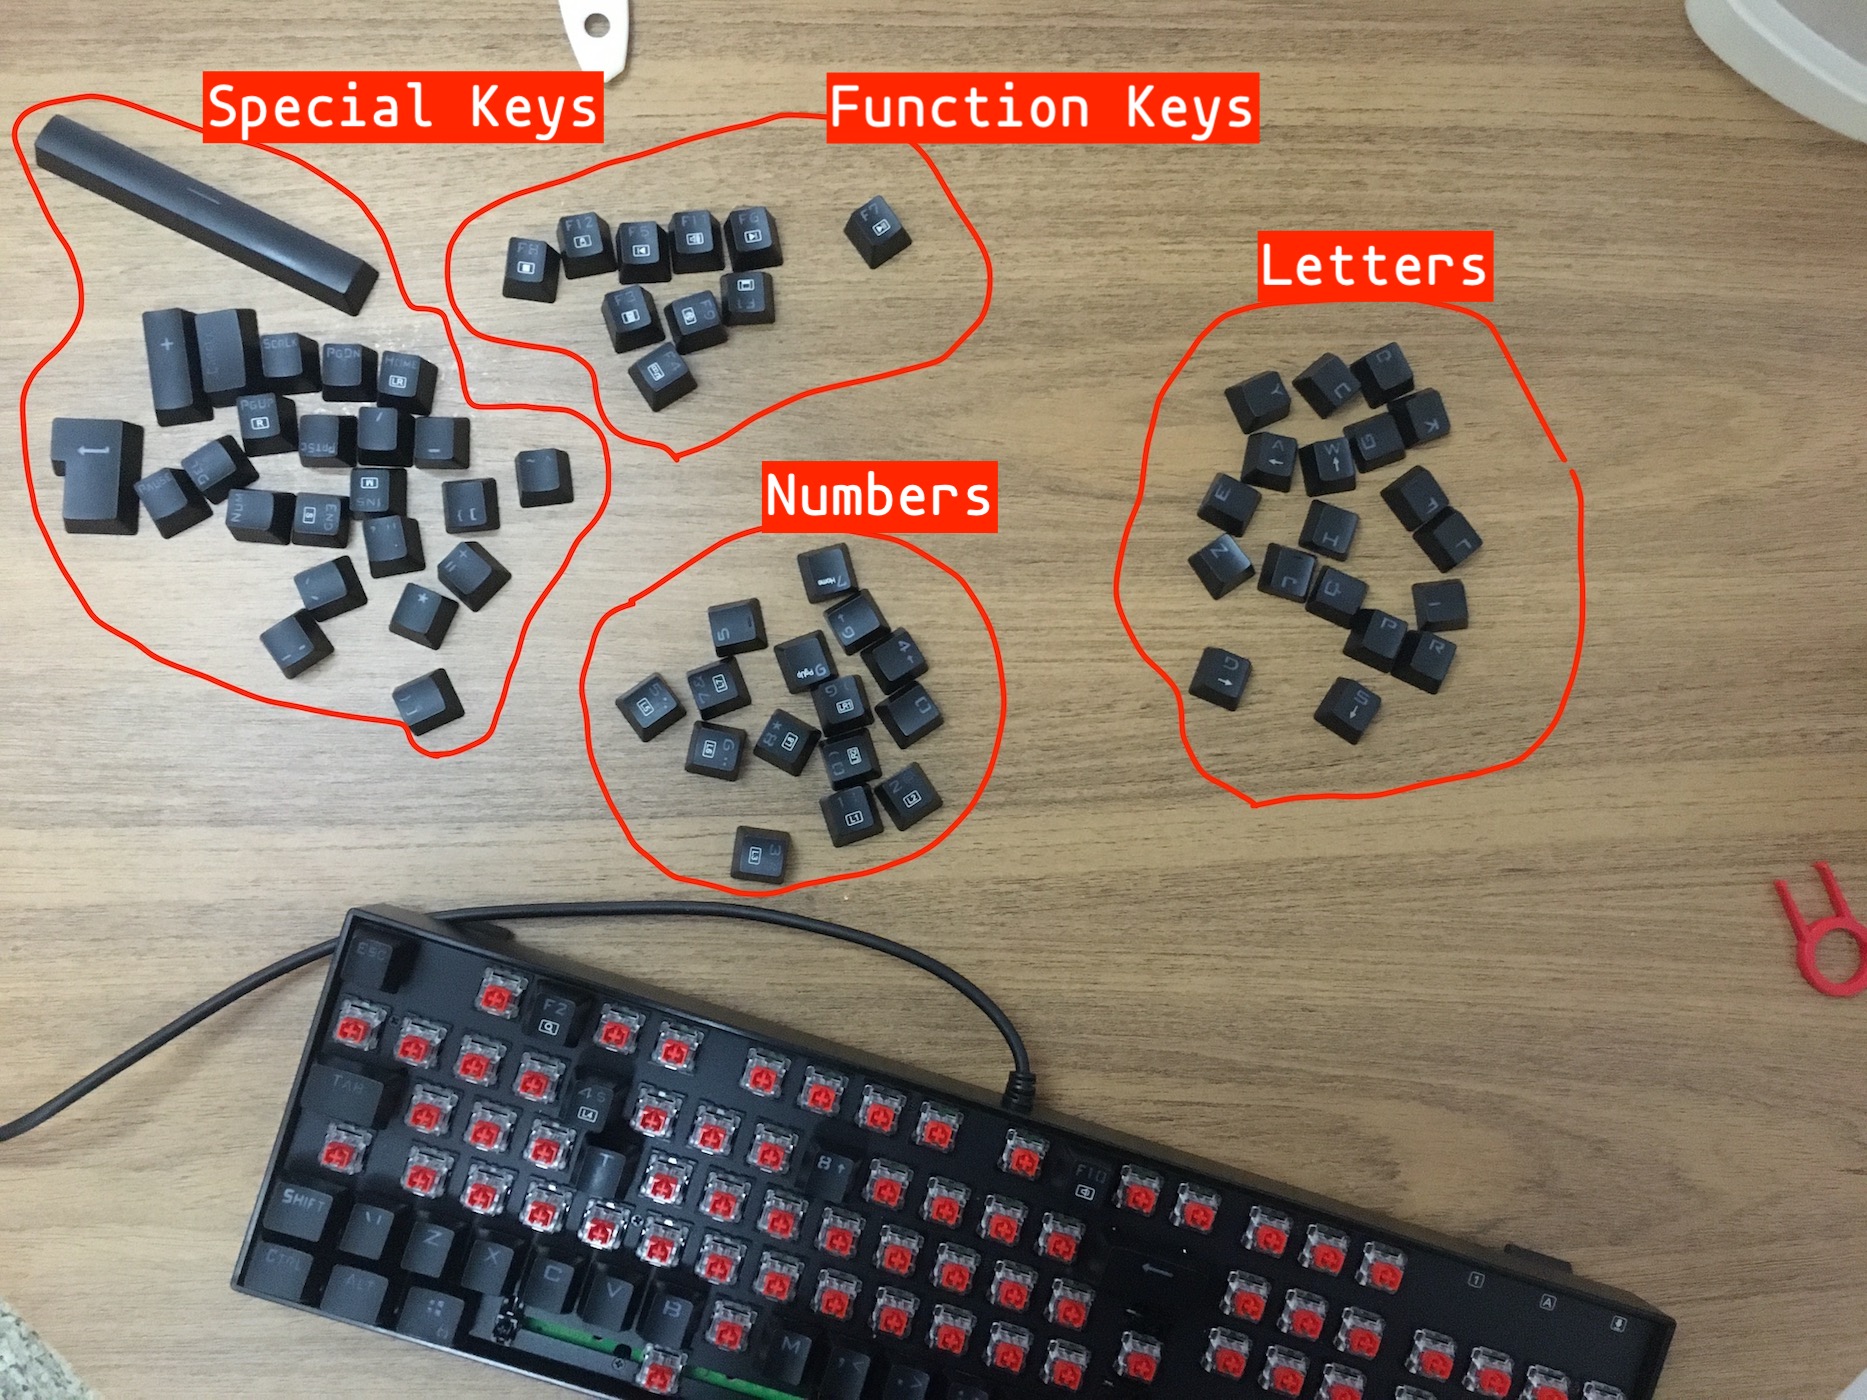 Keyboard and keycaps separated by groups